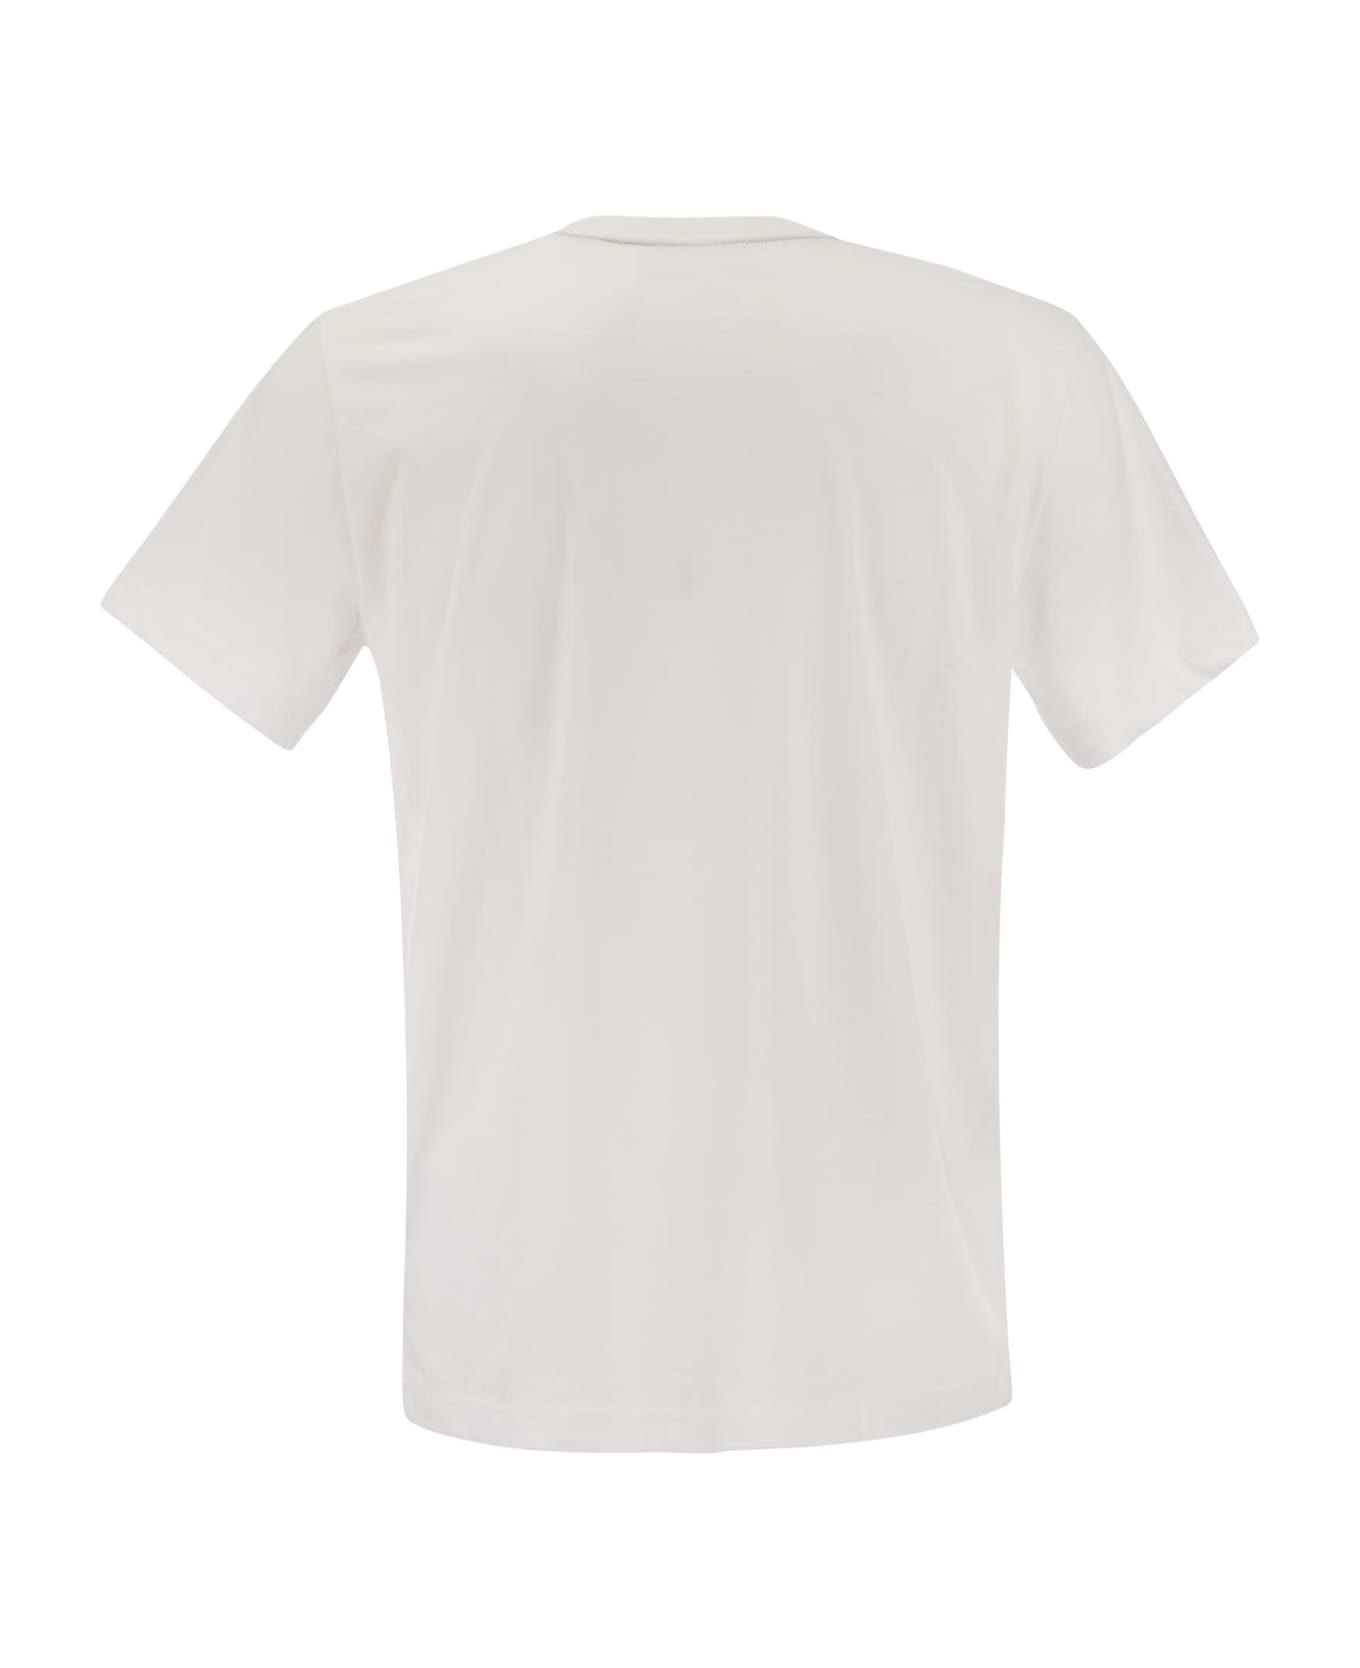 Fay White T-shirt With Pocket - White